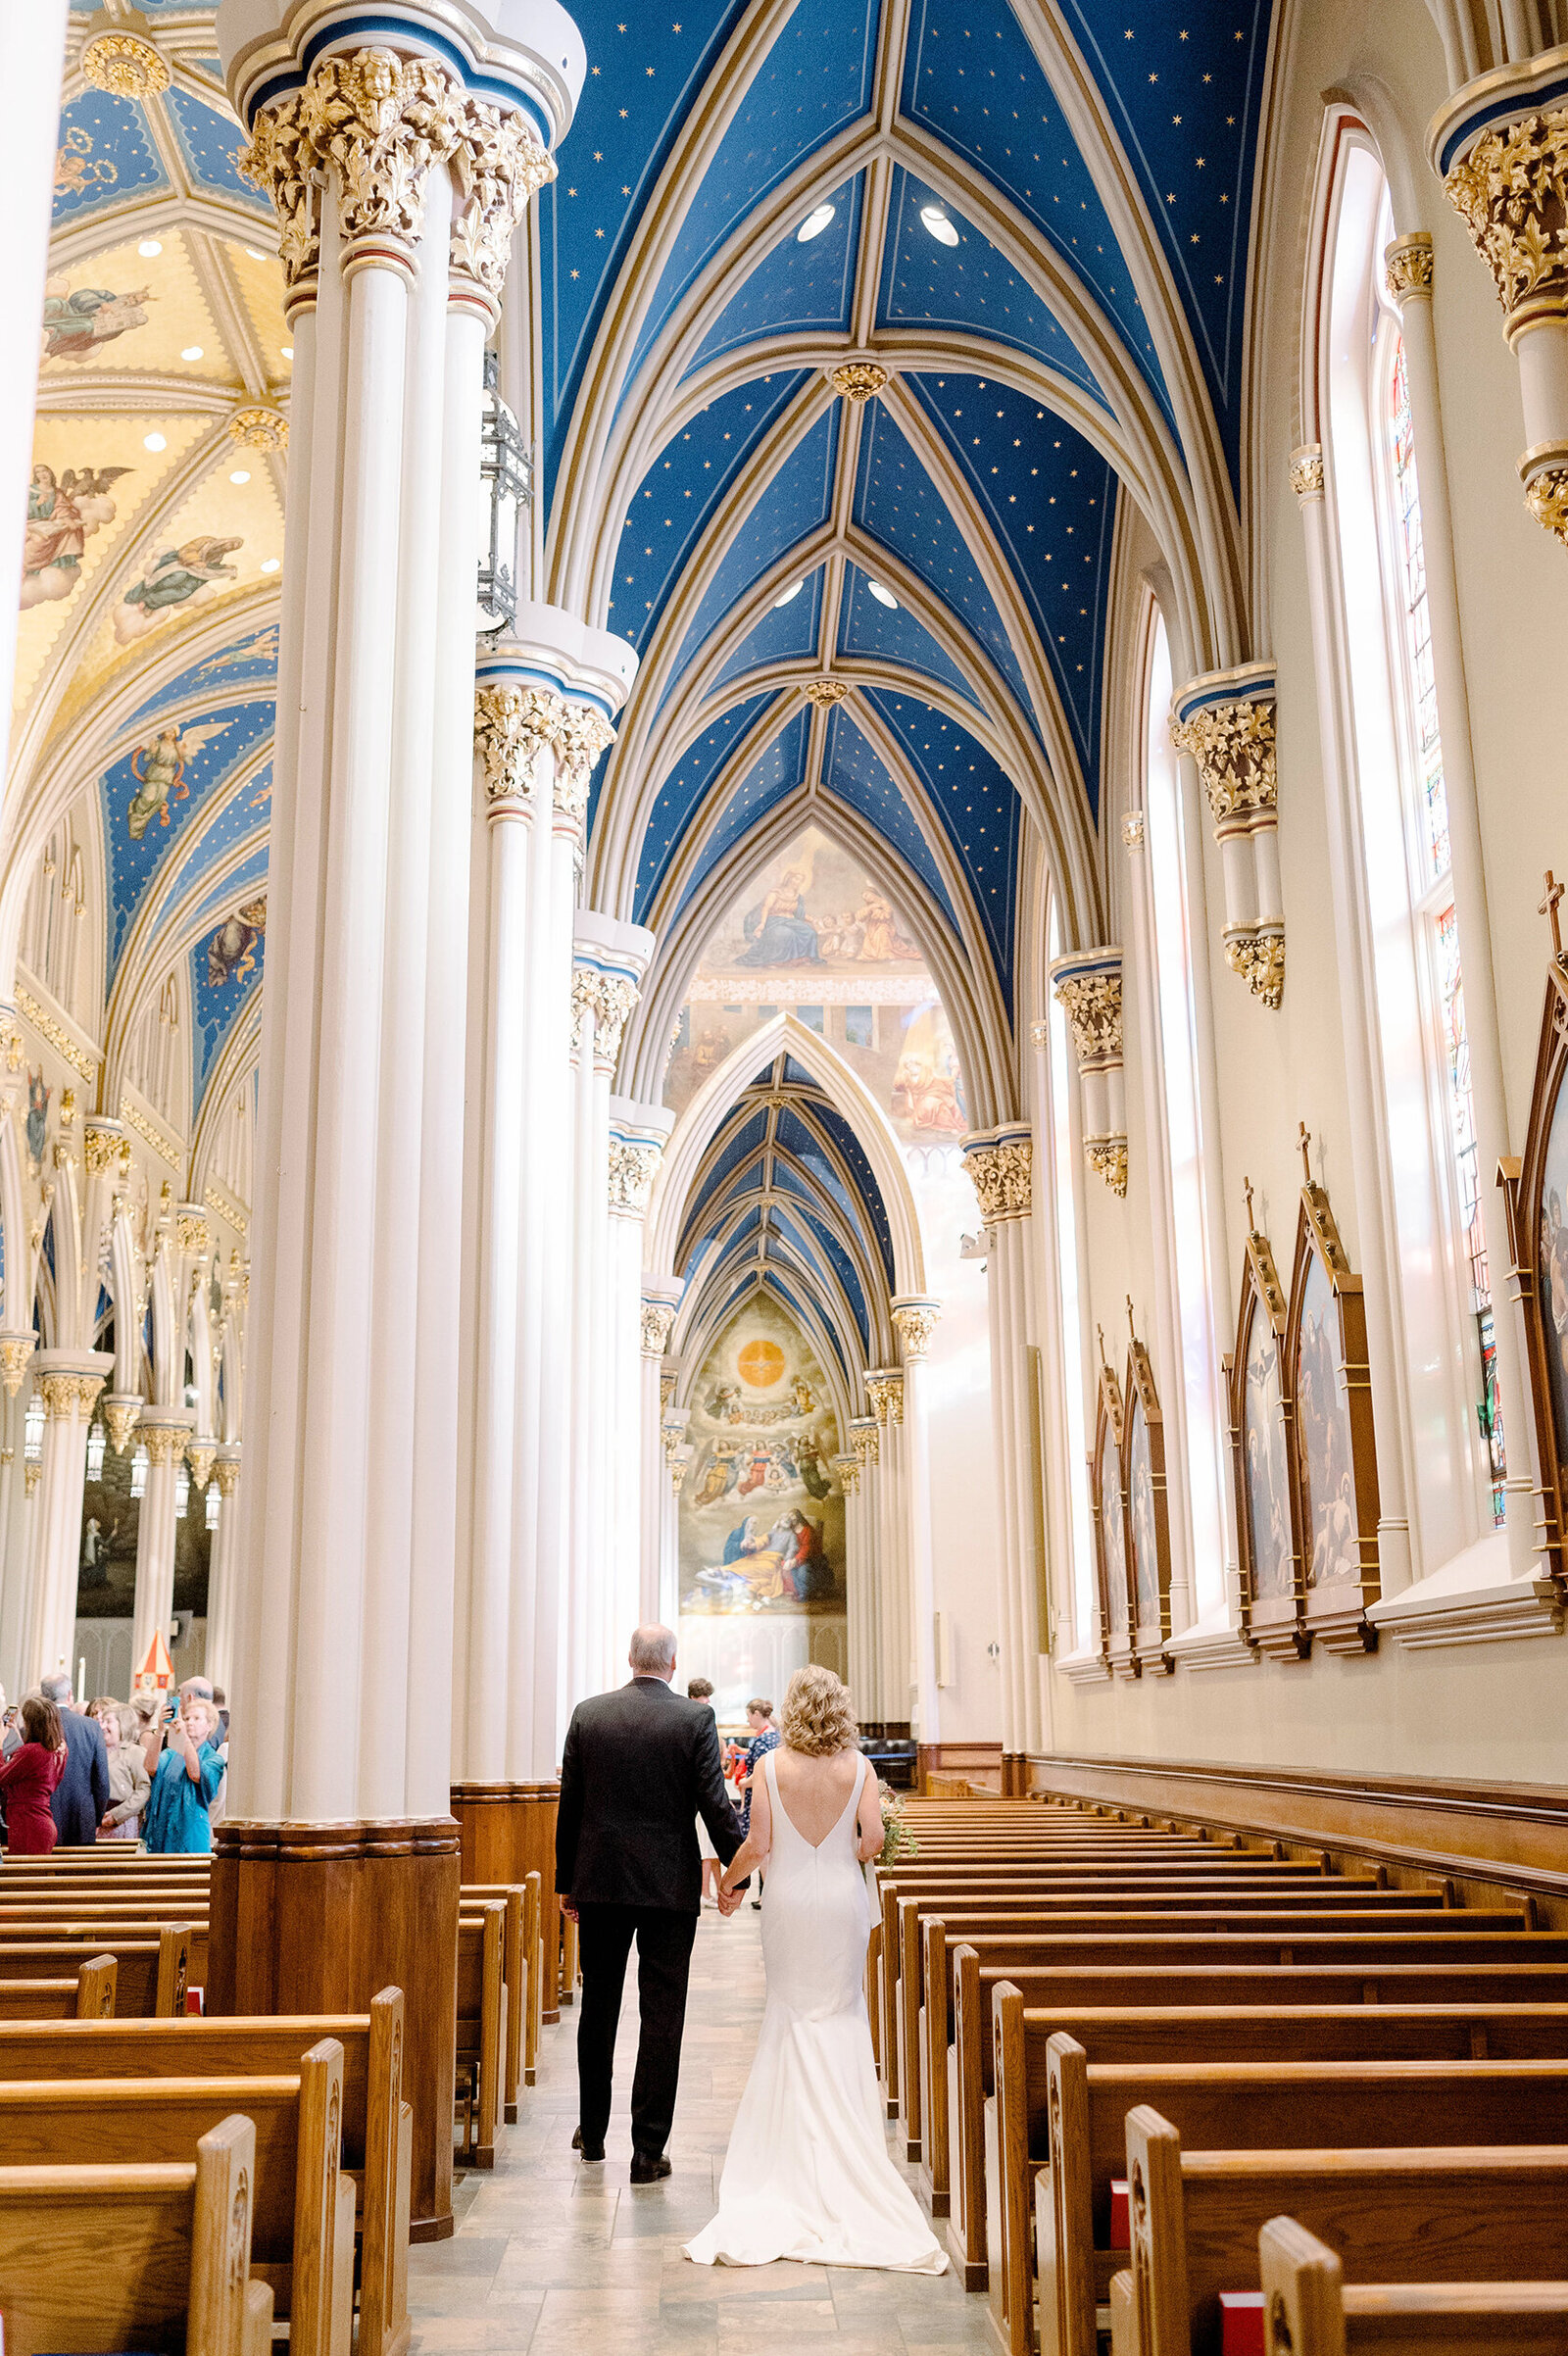 Bride and Groom walking away at the Basilica of the Sacred Heart